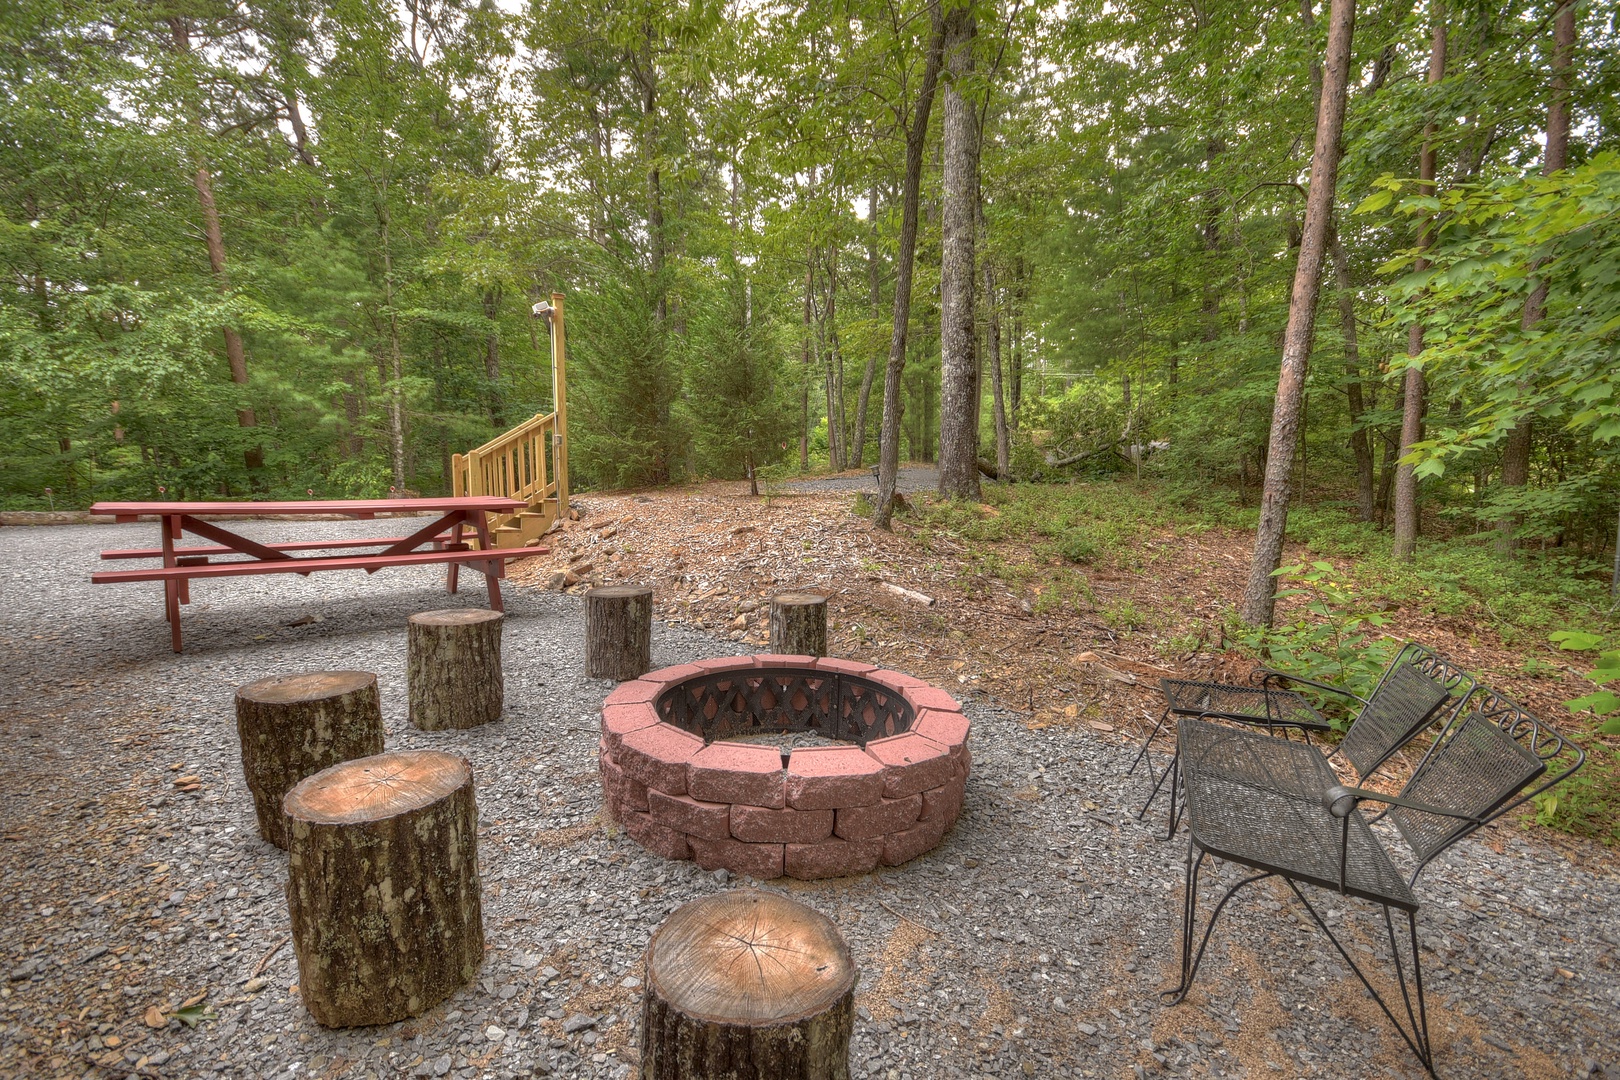 Falling Leaf- Firepit with outdoor seating located by the driveway